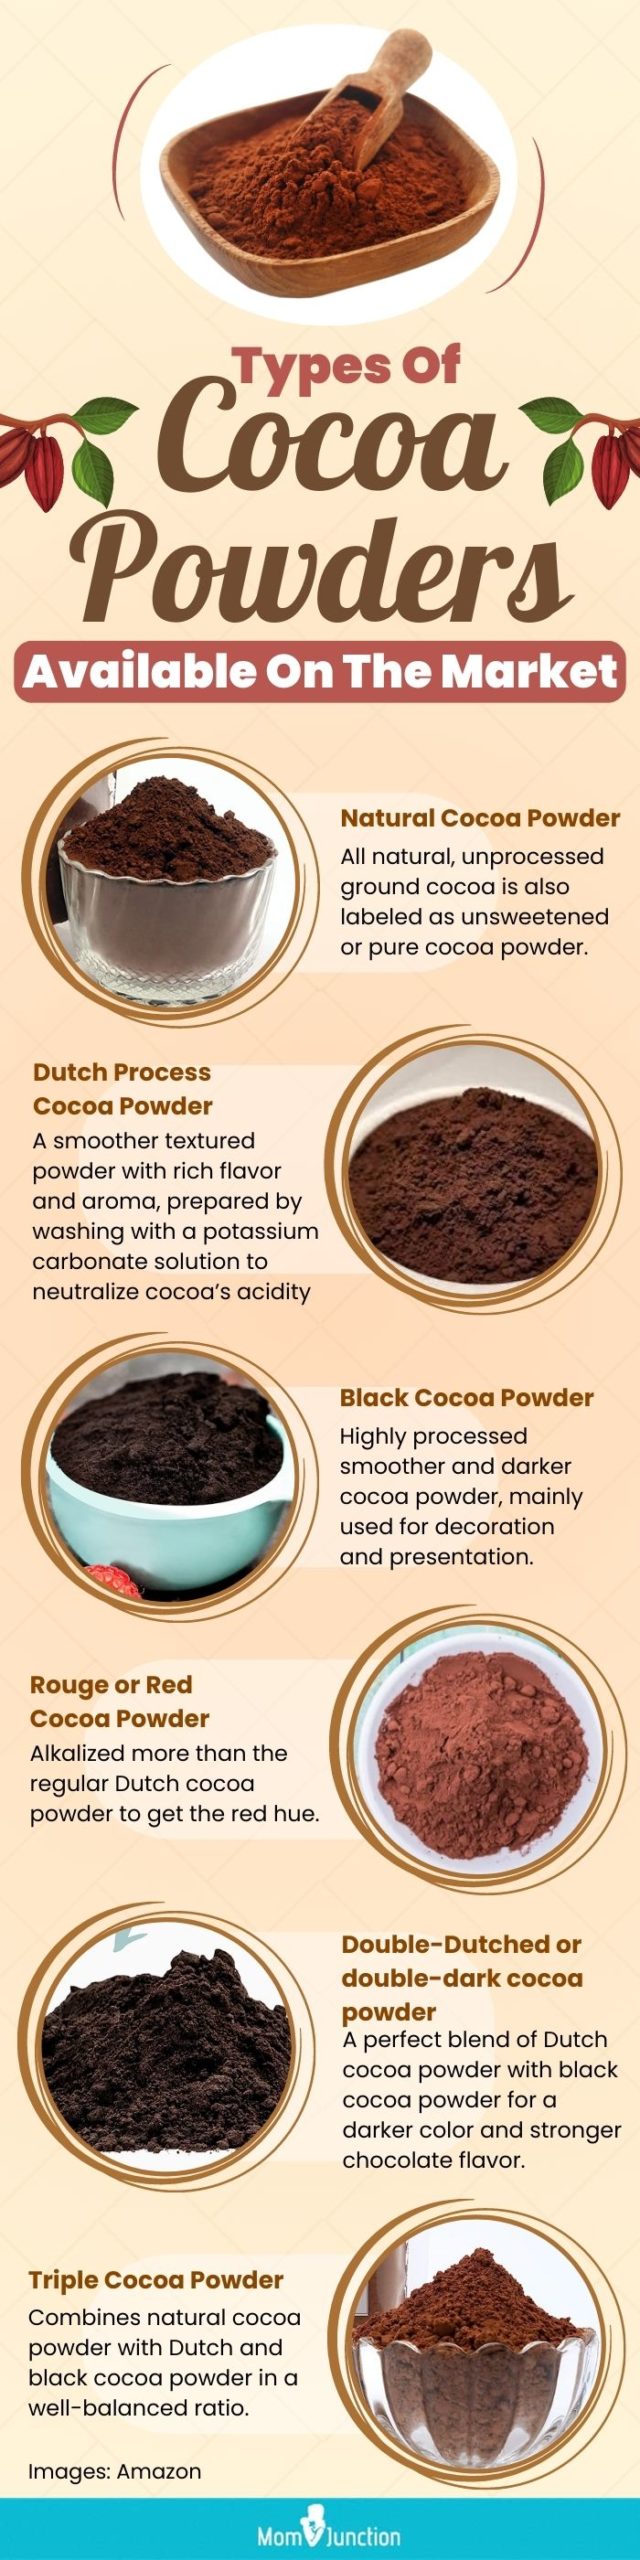 https://www.momjunction.com/wp-content/uploads/2021/04/Types-Of-Cocoa-Powders-Available-On-The-Market-scaled.jpg